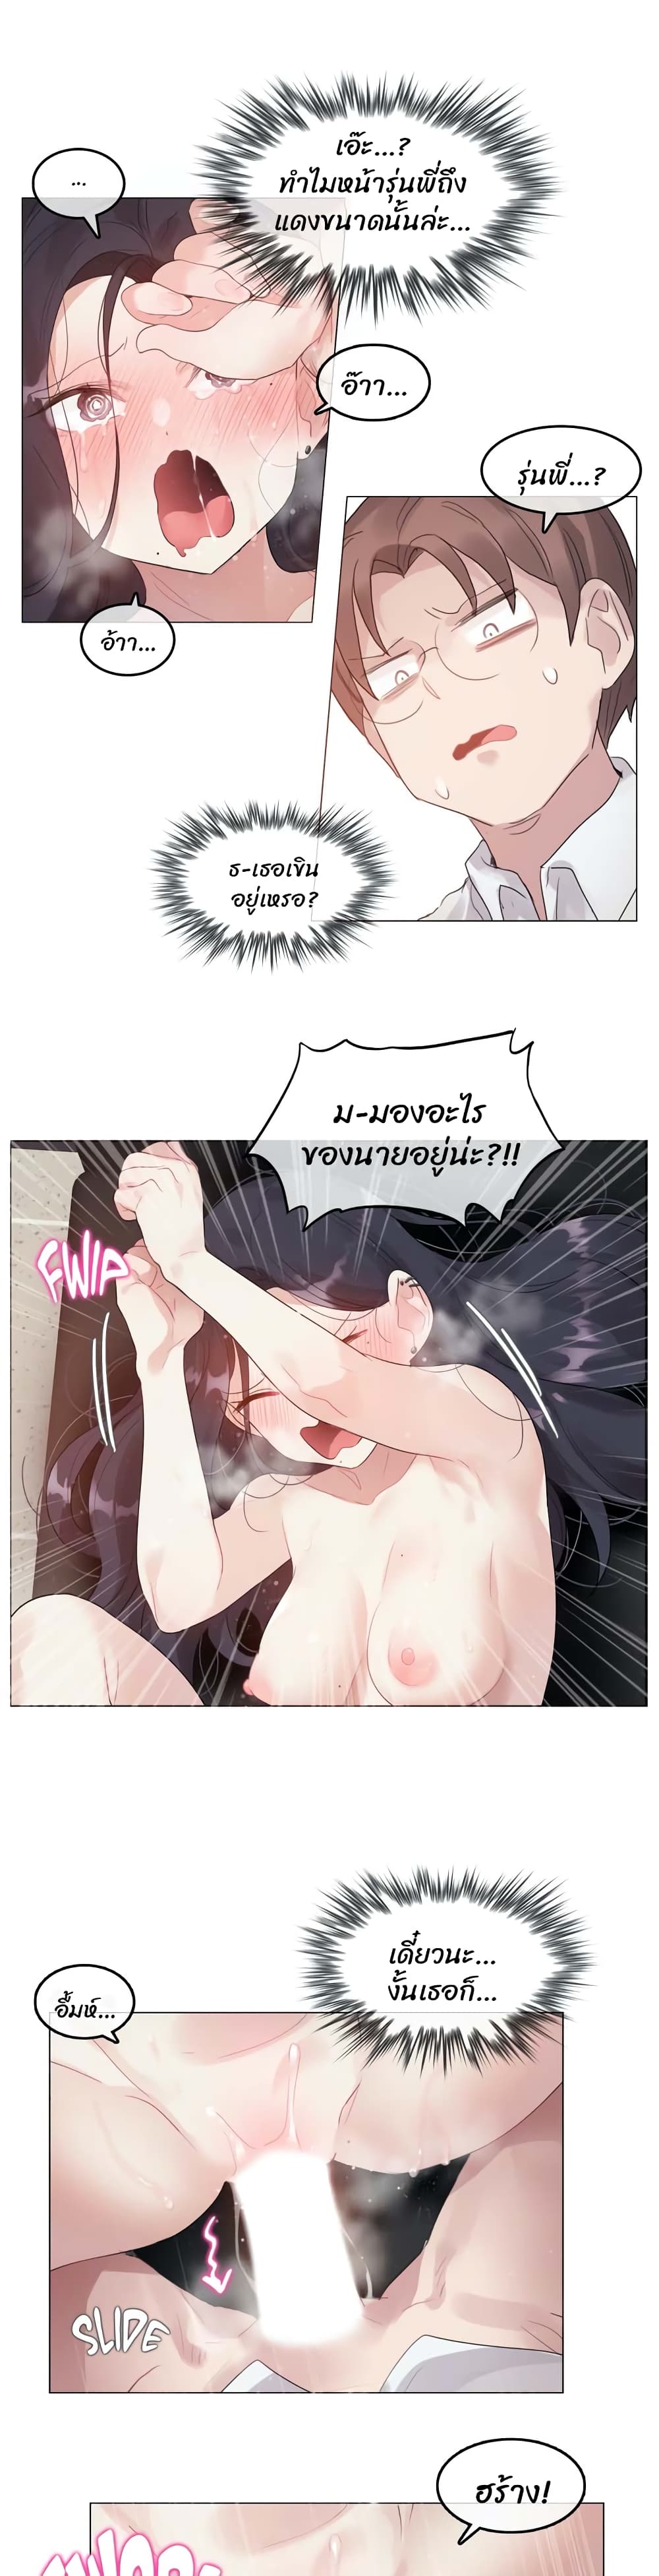 A Pervert's Daily Life 103 (1)